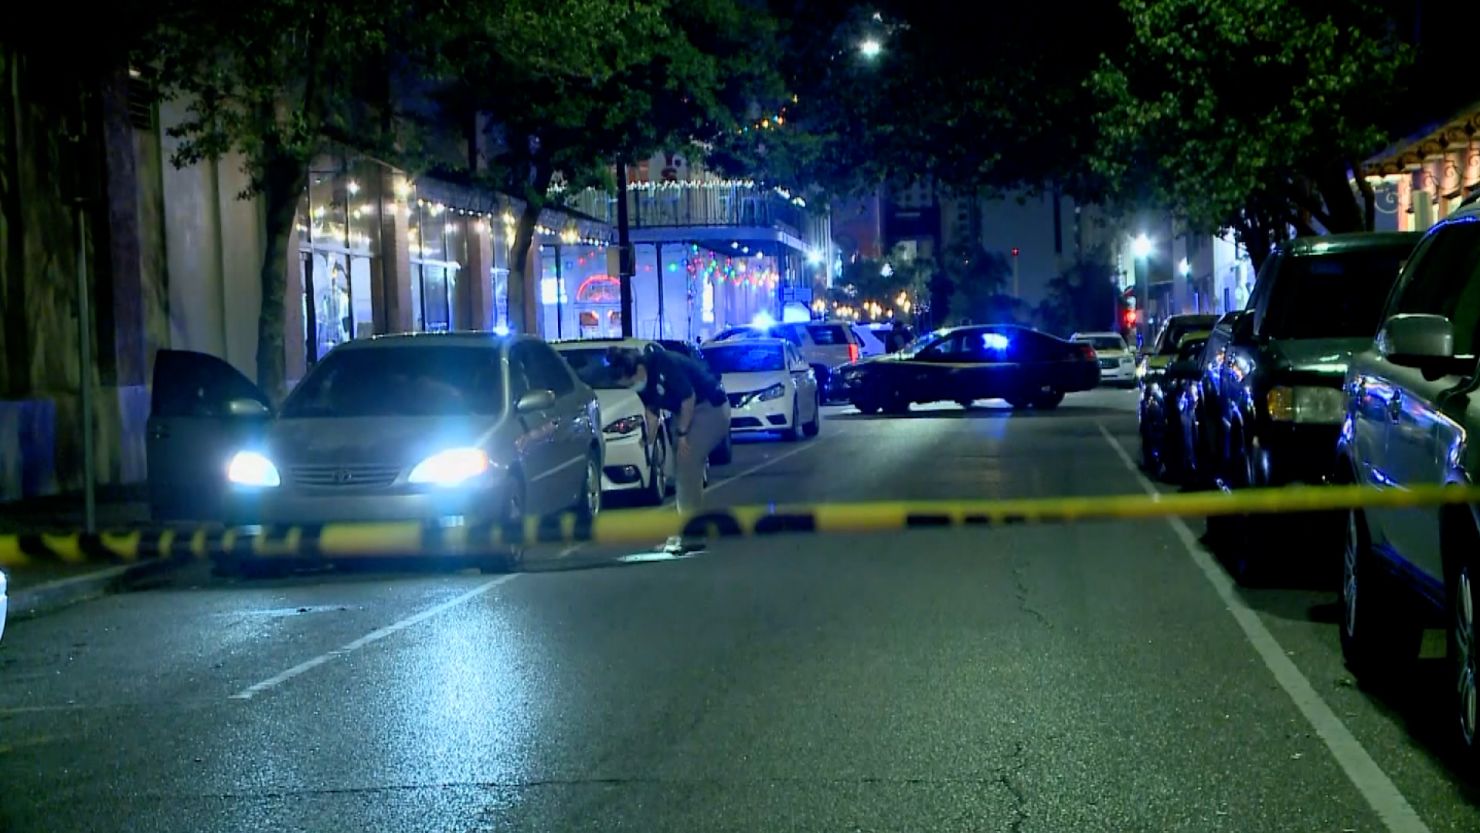 Police tape cordons off the scene of a shooting in New Orleans on Sunday.